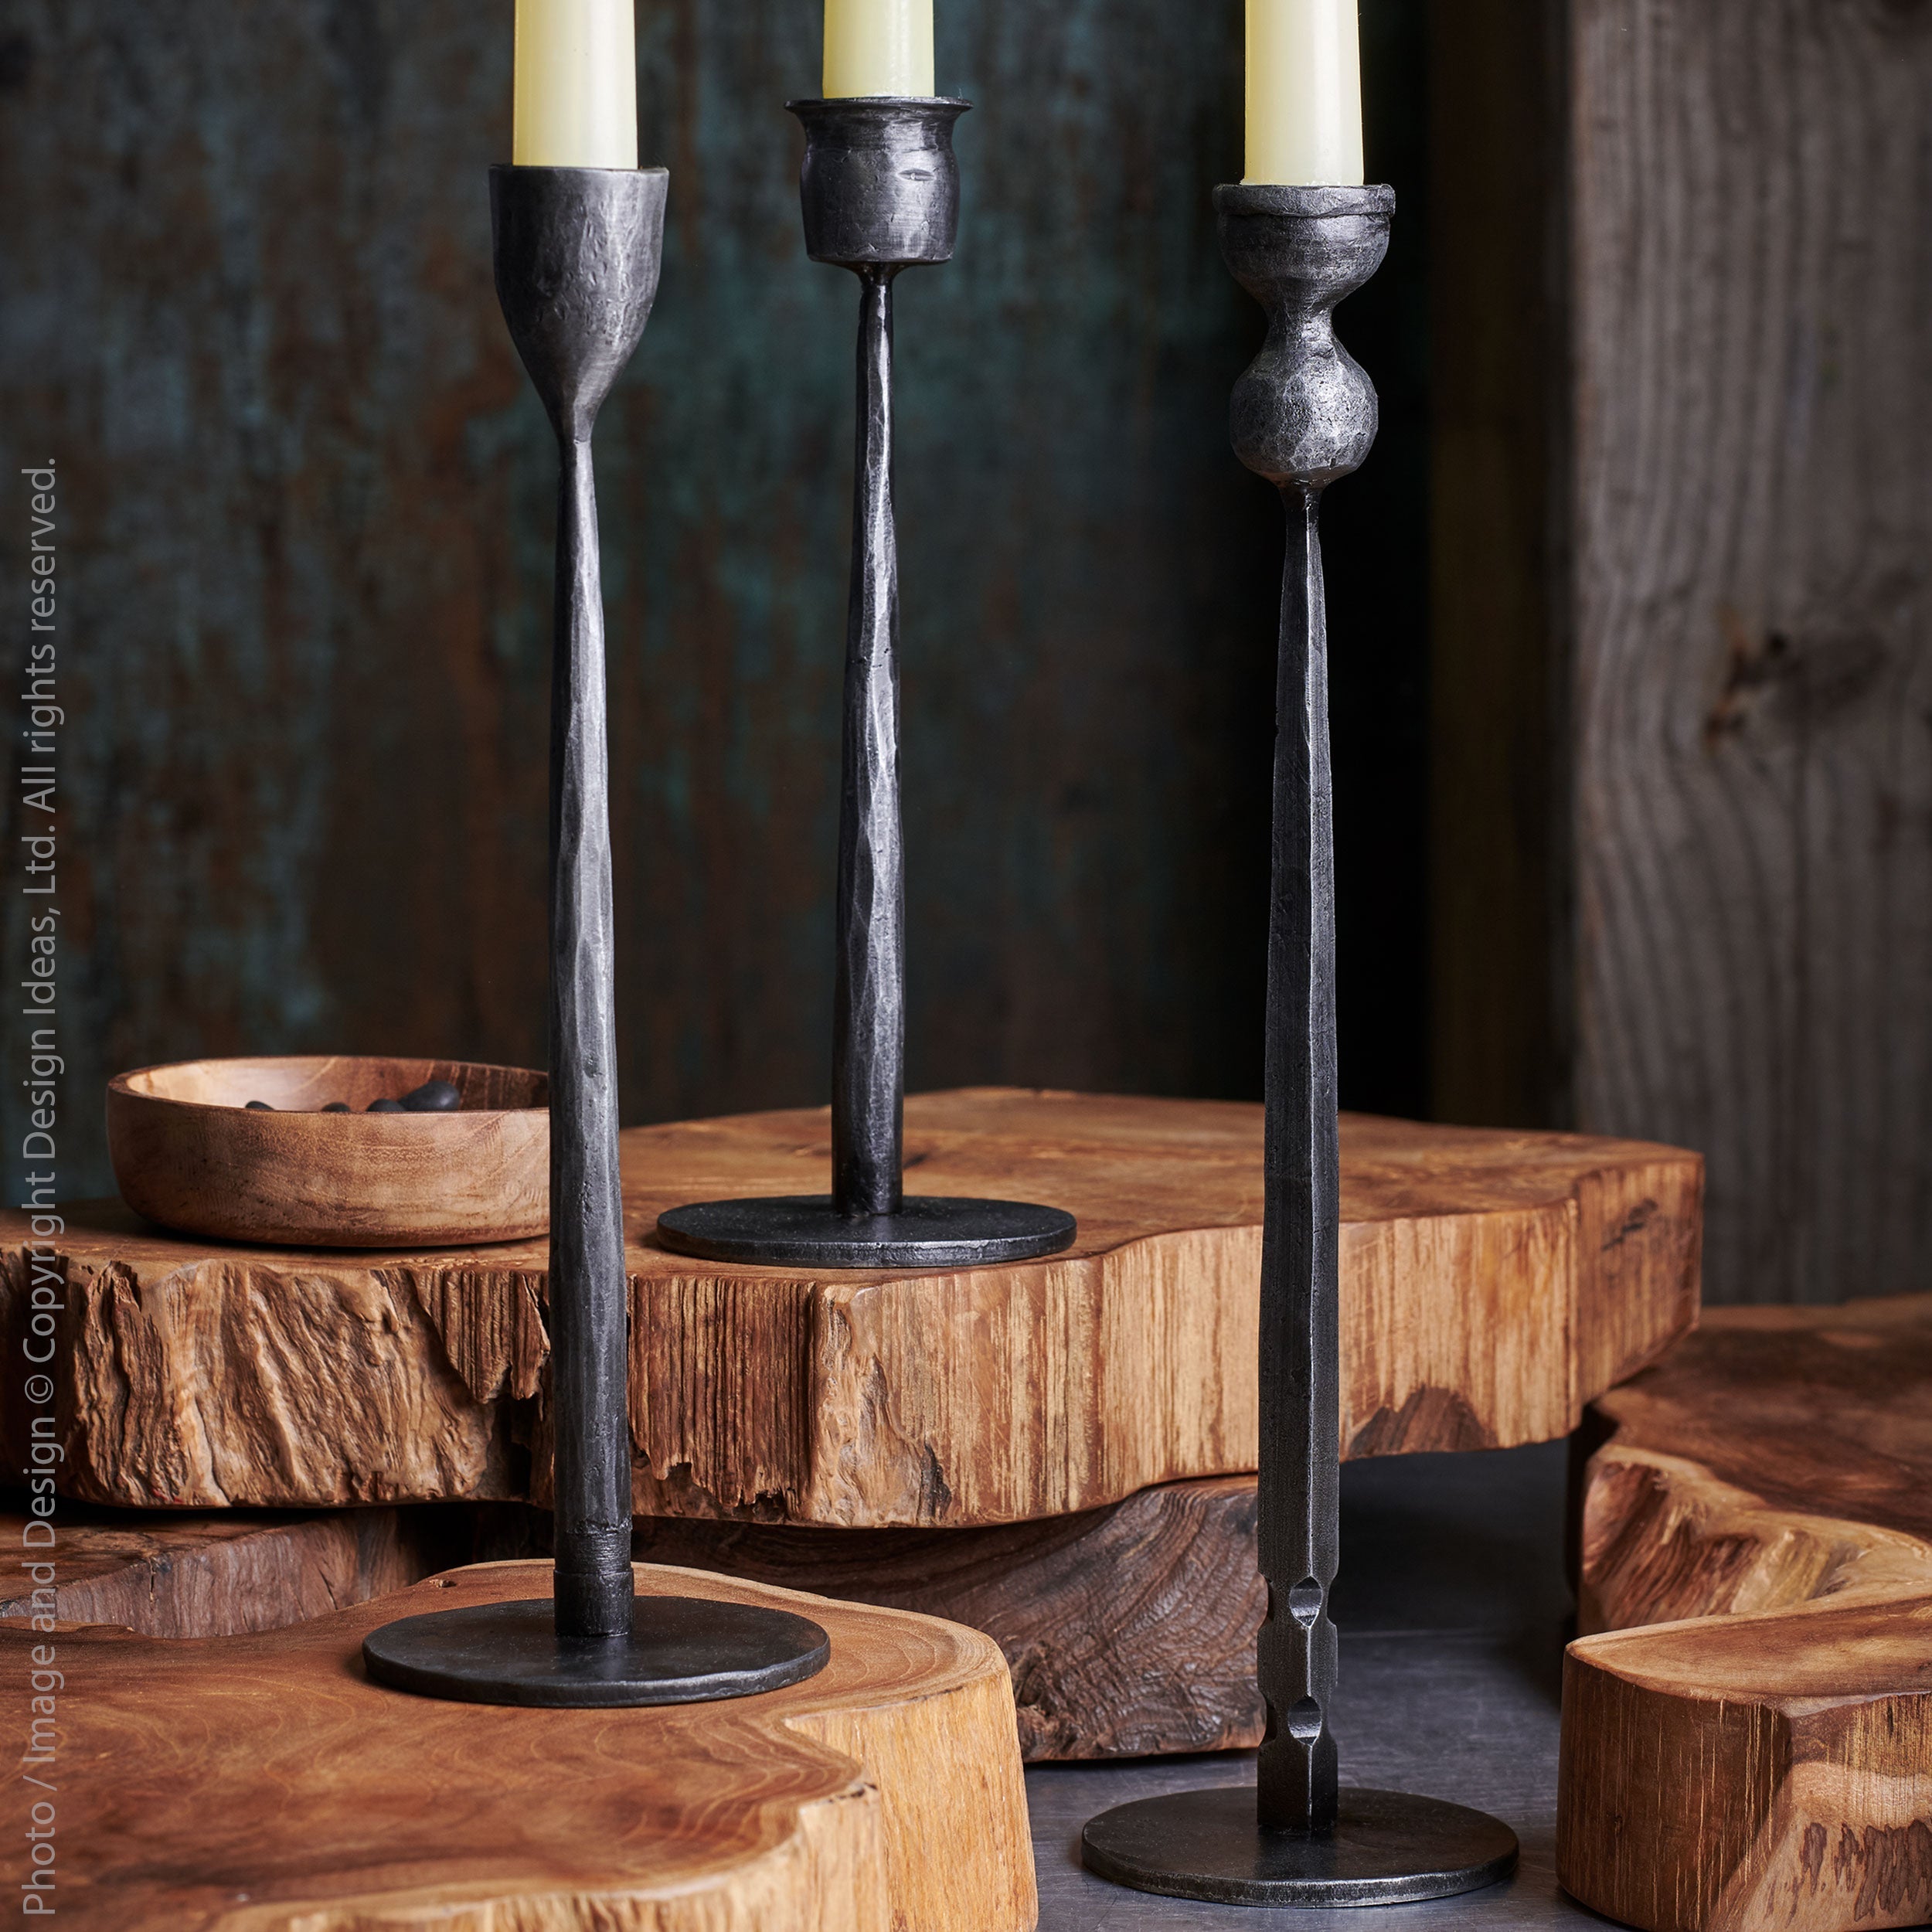 Jasper Iron Taper Candle Holder (9.8 Inch) Black Color | Image 2 | From the Jasper Collection | Skillfully constructed with natural iron for long lasting use | Available in copper color | texxture home